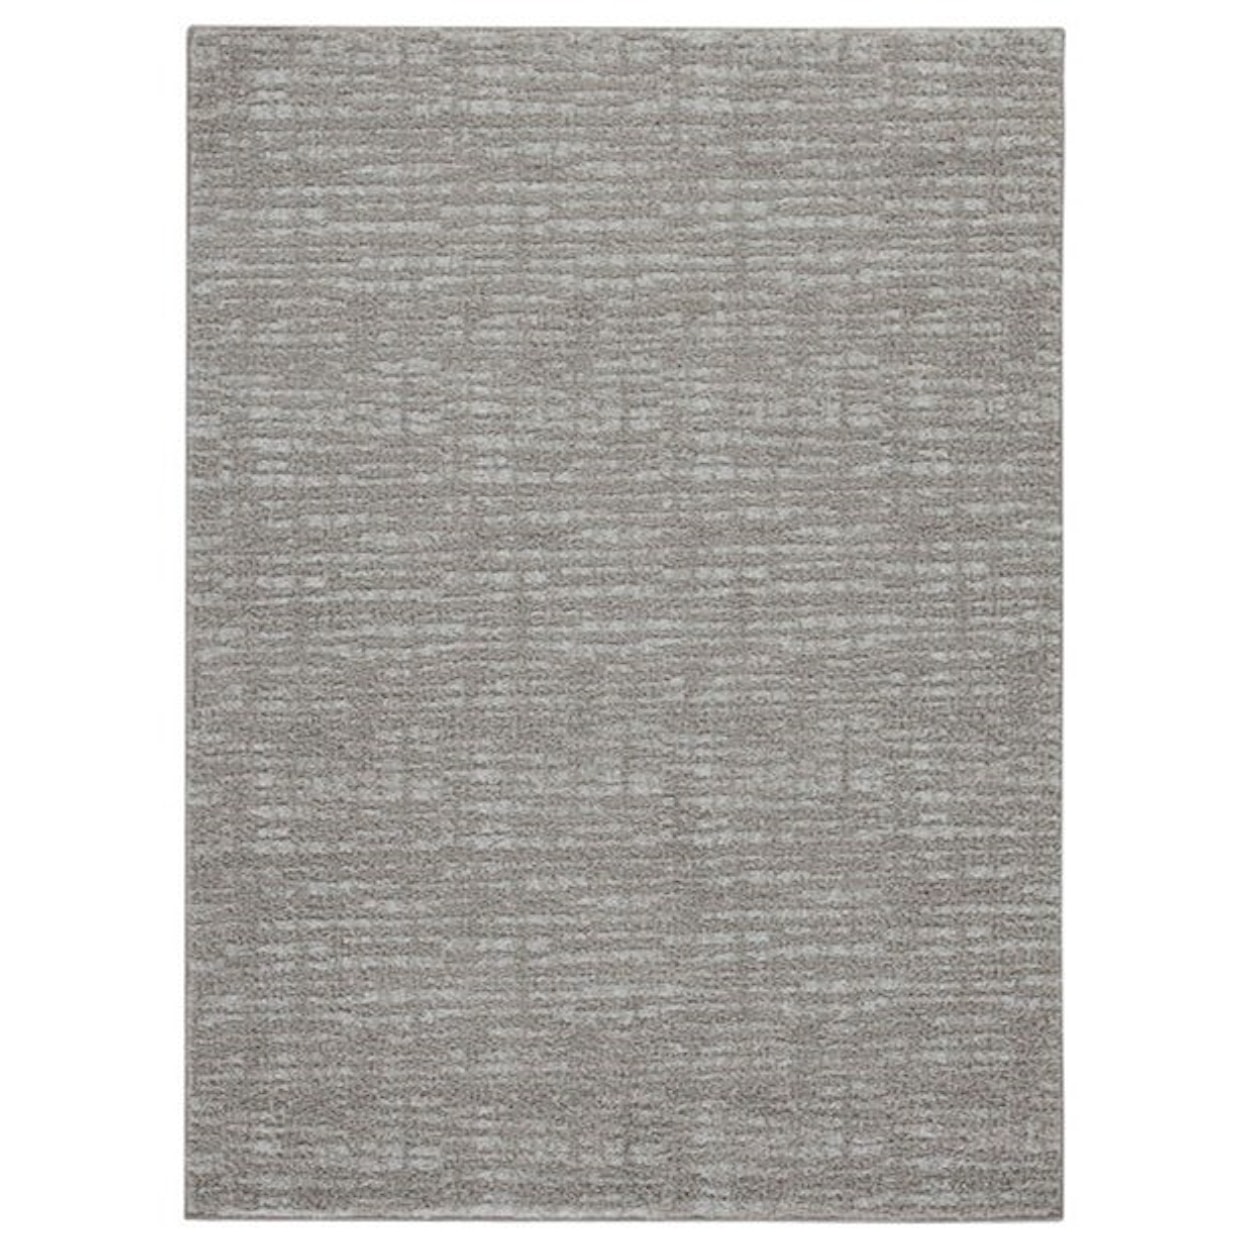 Benchcraft Casual Area Rugs Norris Taupe/White Large Rug